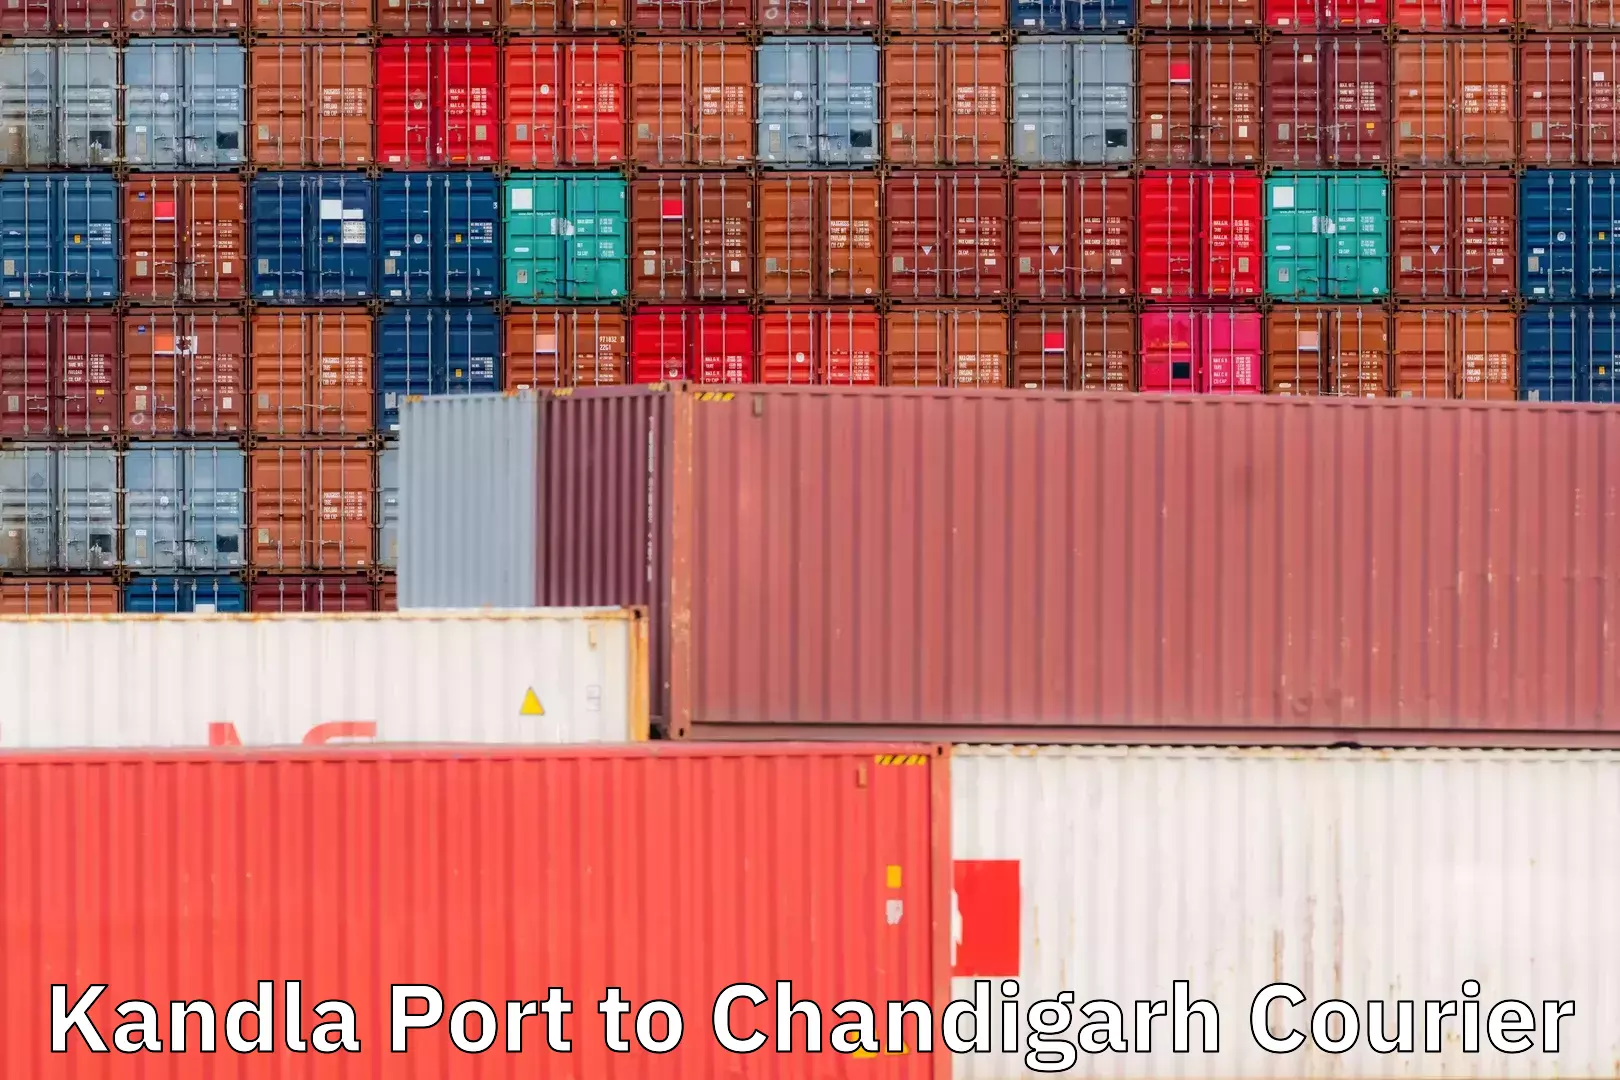 Fast-track shipping solutions Kandla Port to Chandigarh